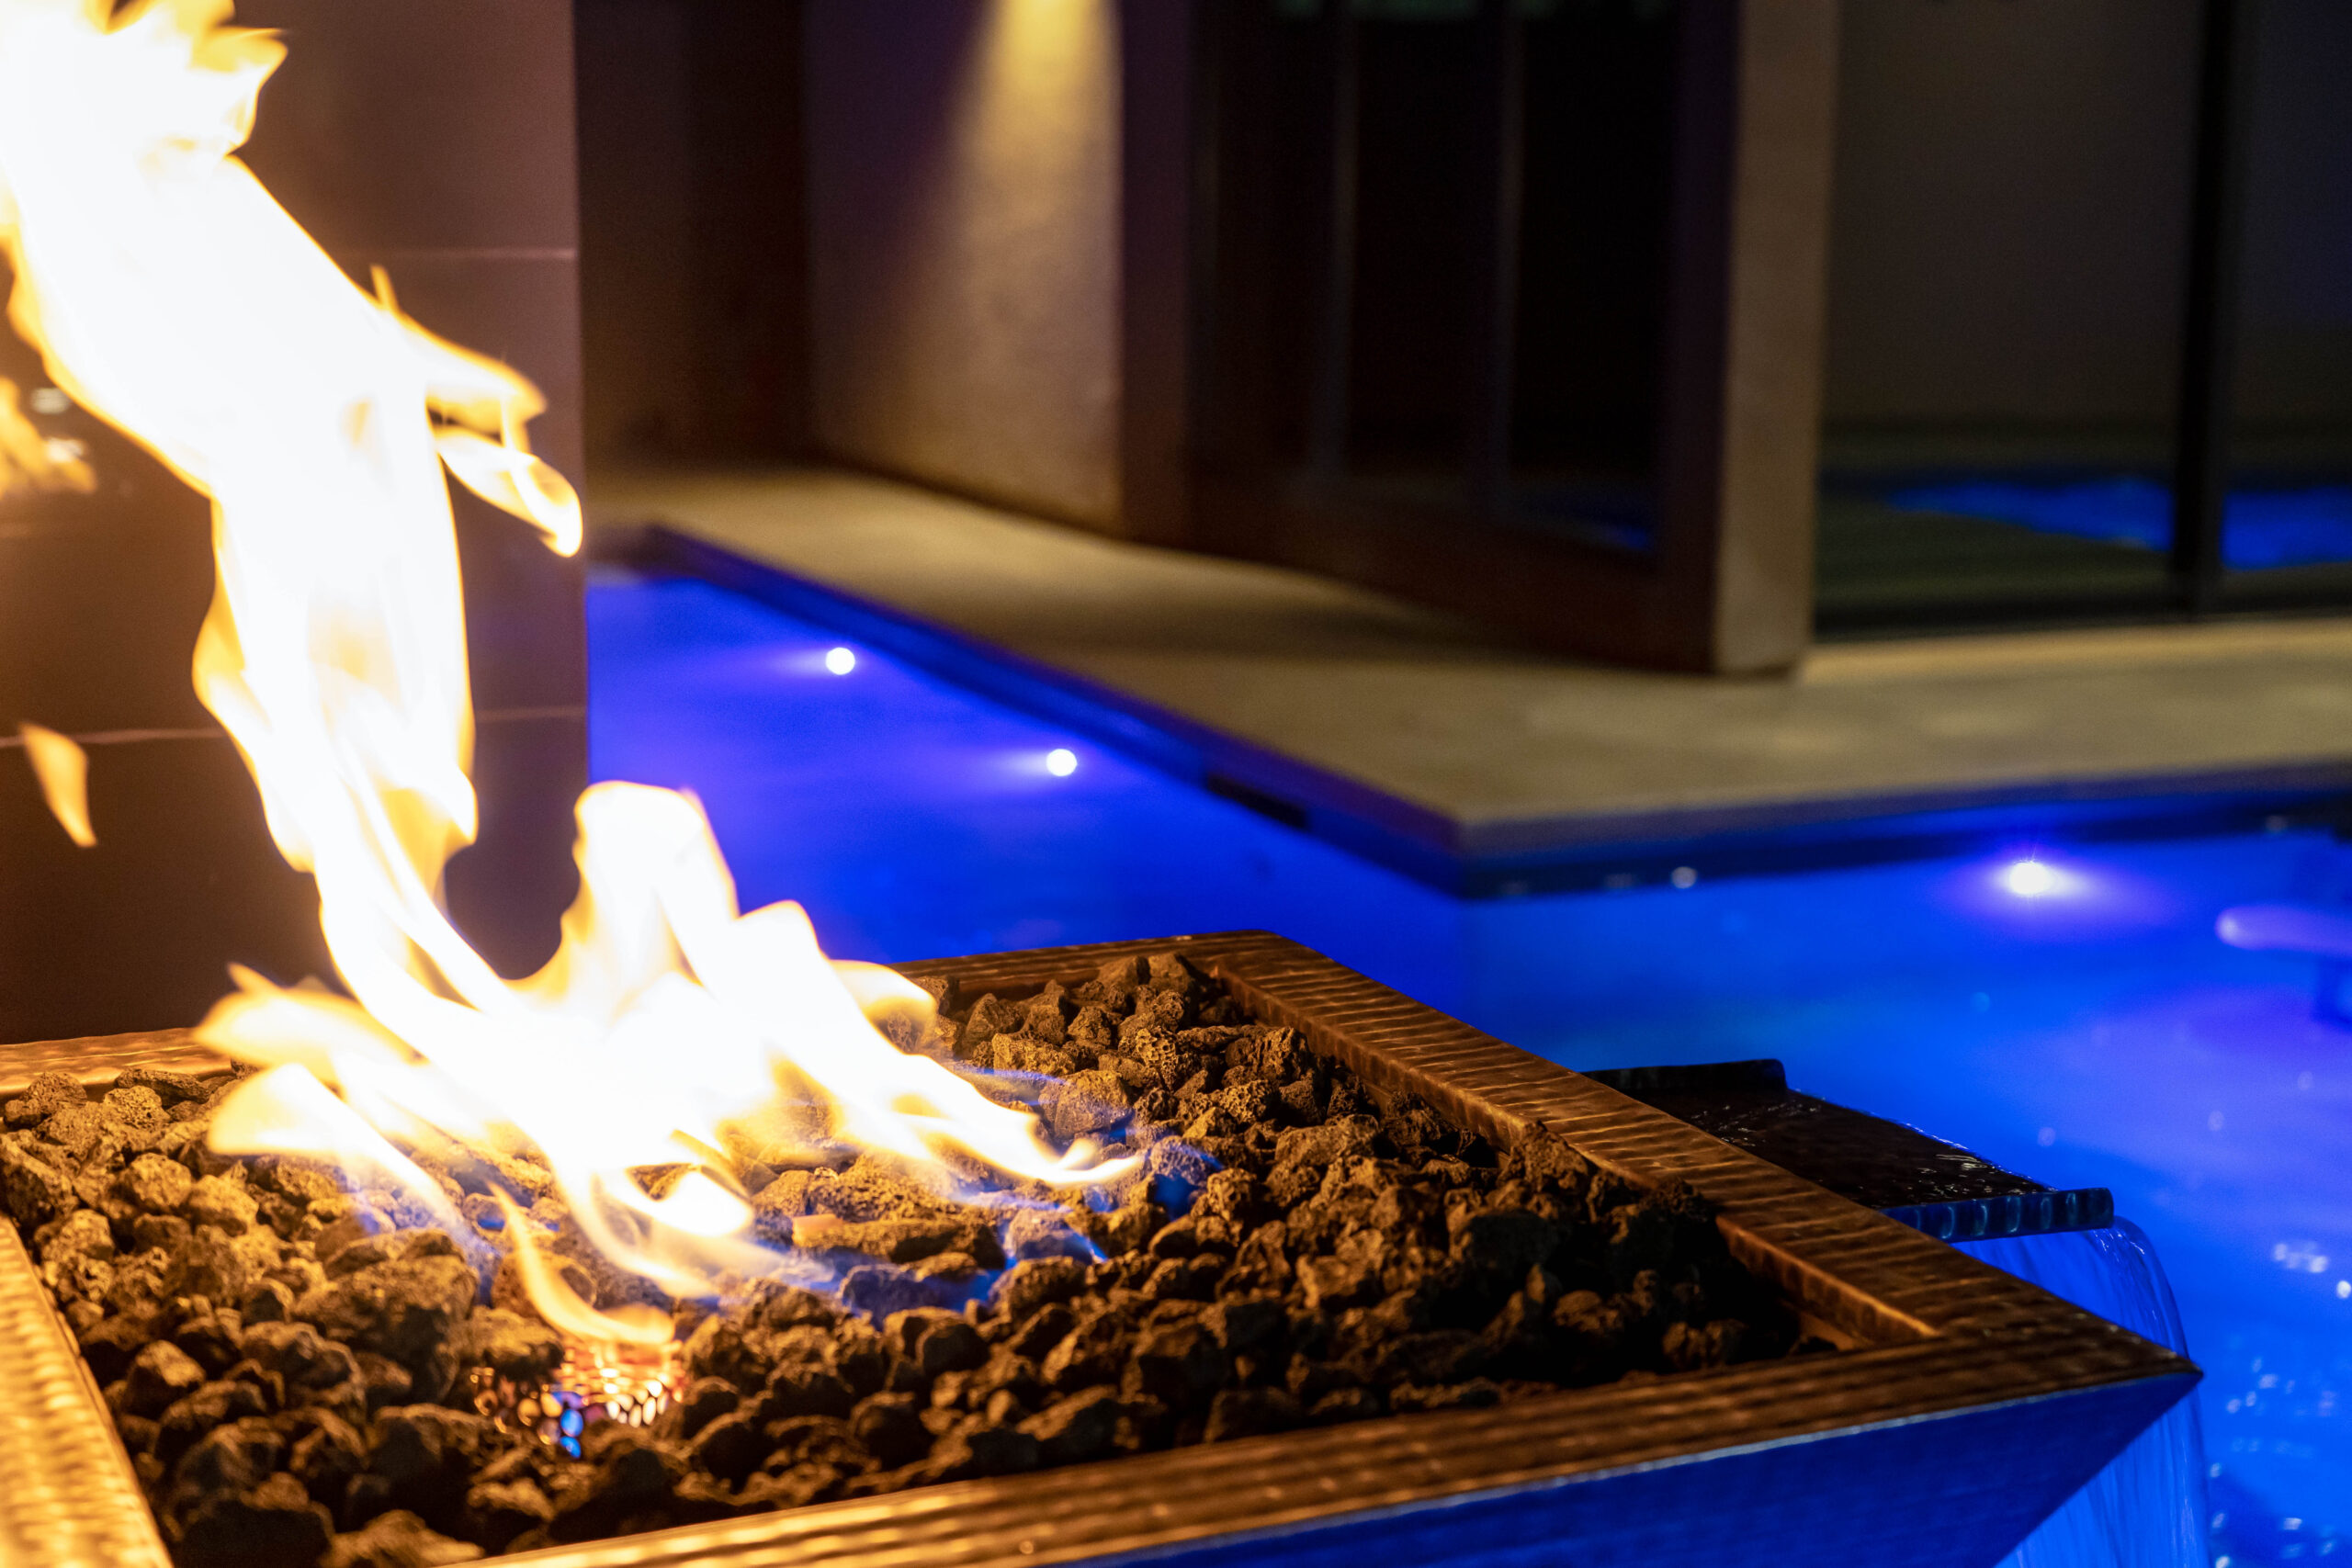 A controlled and safe fire feature integrated into a pool area